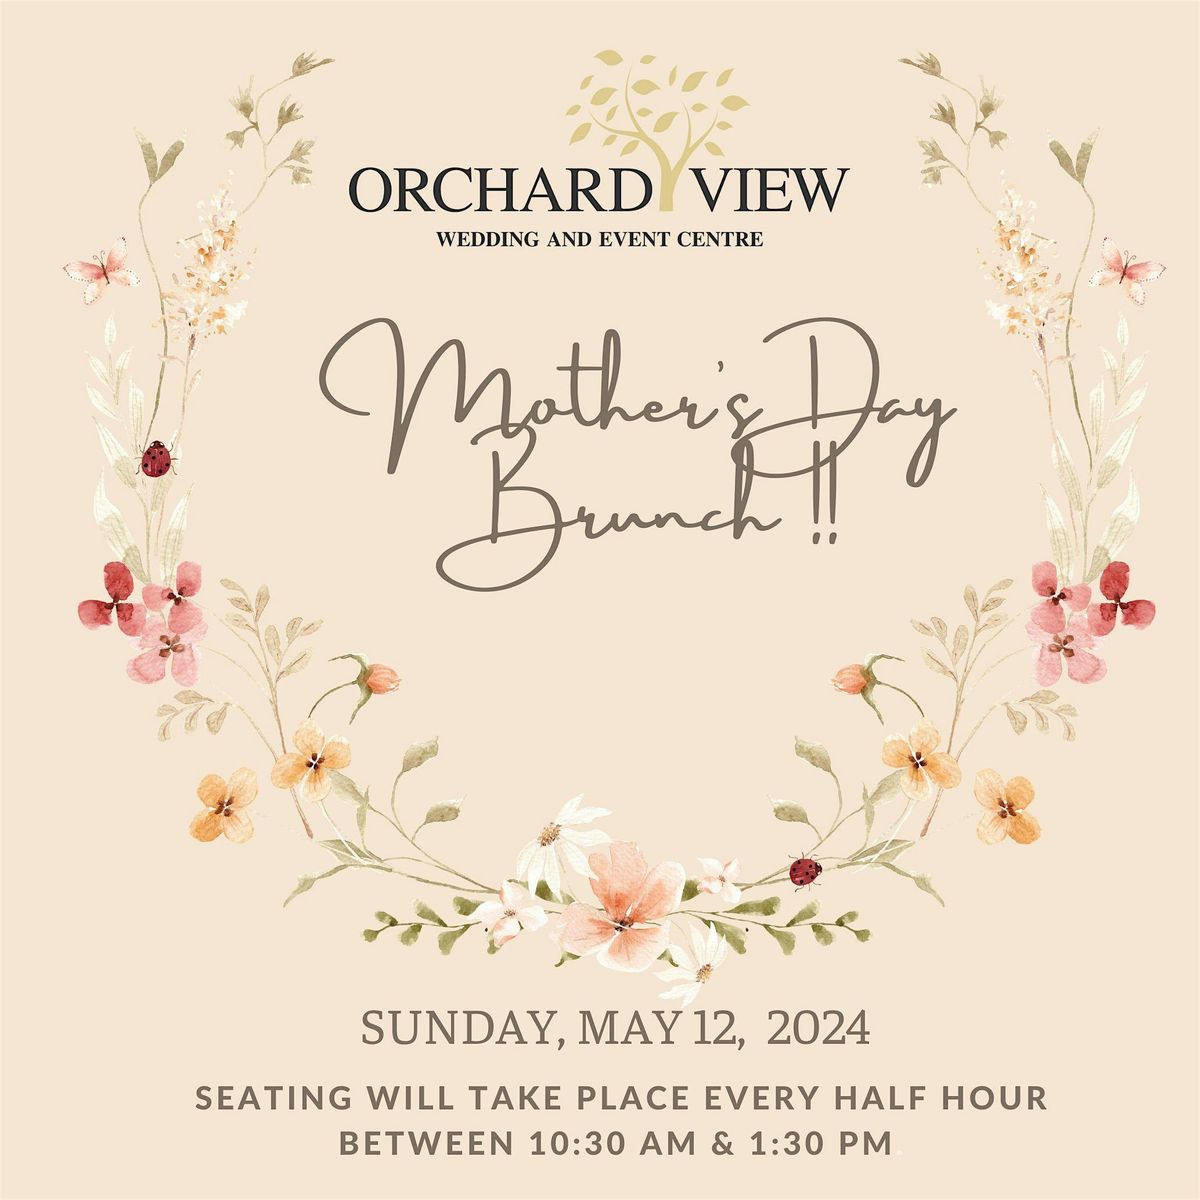 Mother's Day Brunch at Orchard View 2024